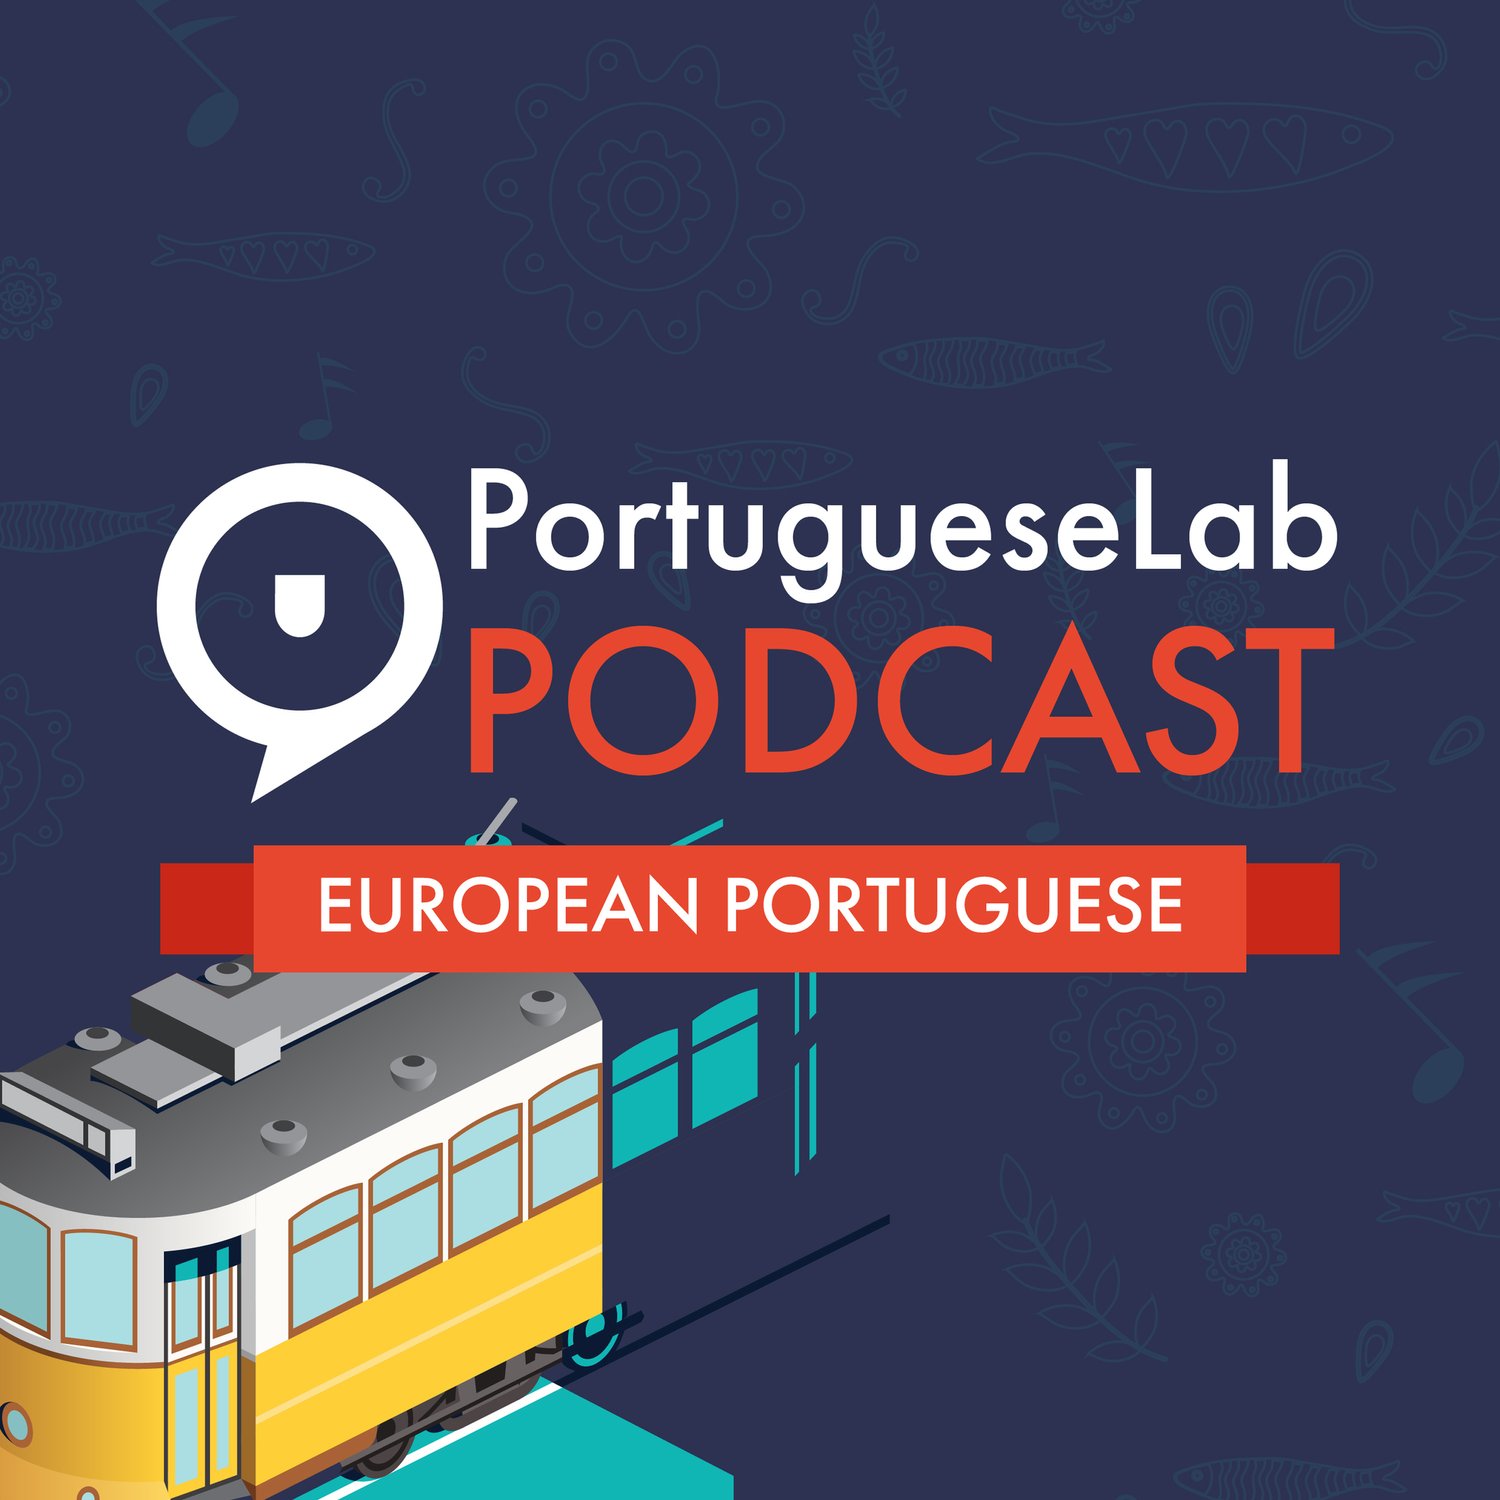 Phrases - how to make requests in Portuguese